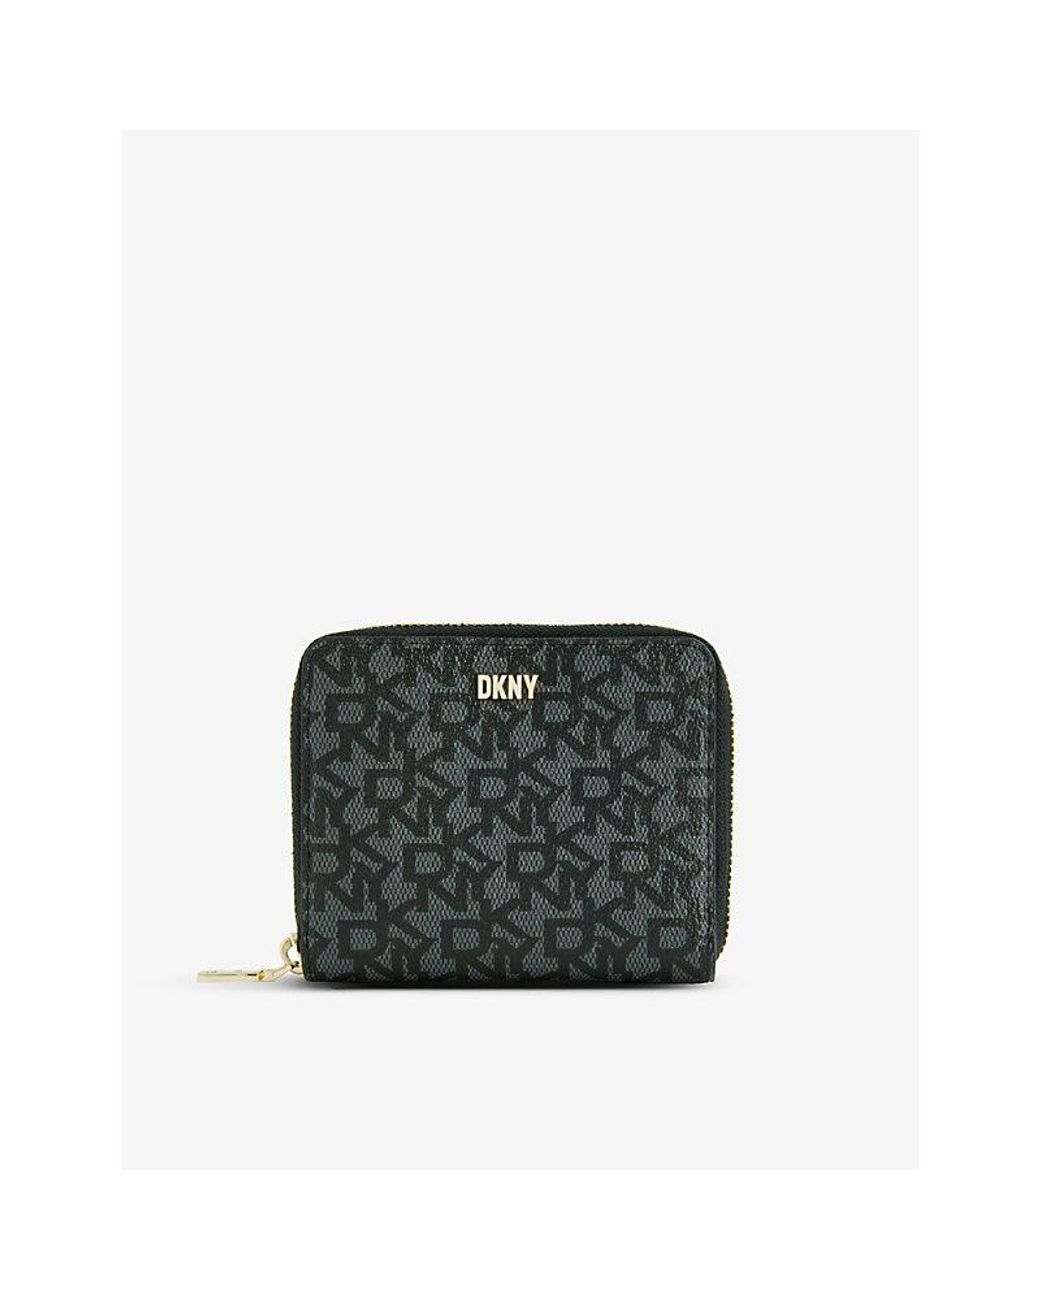 Black synthetic leather with Grey LV monogram print